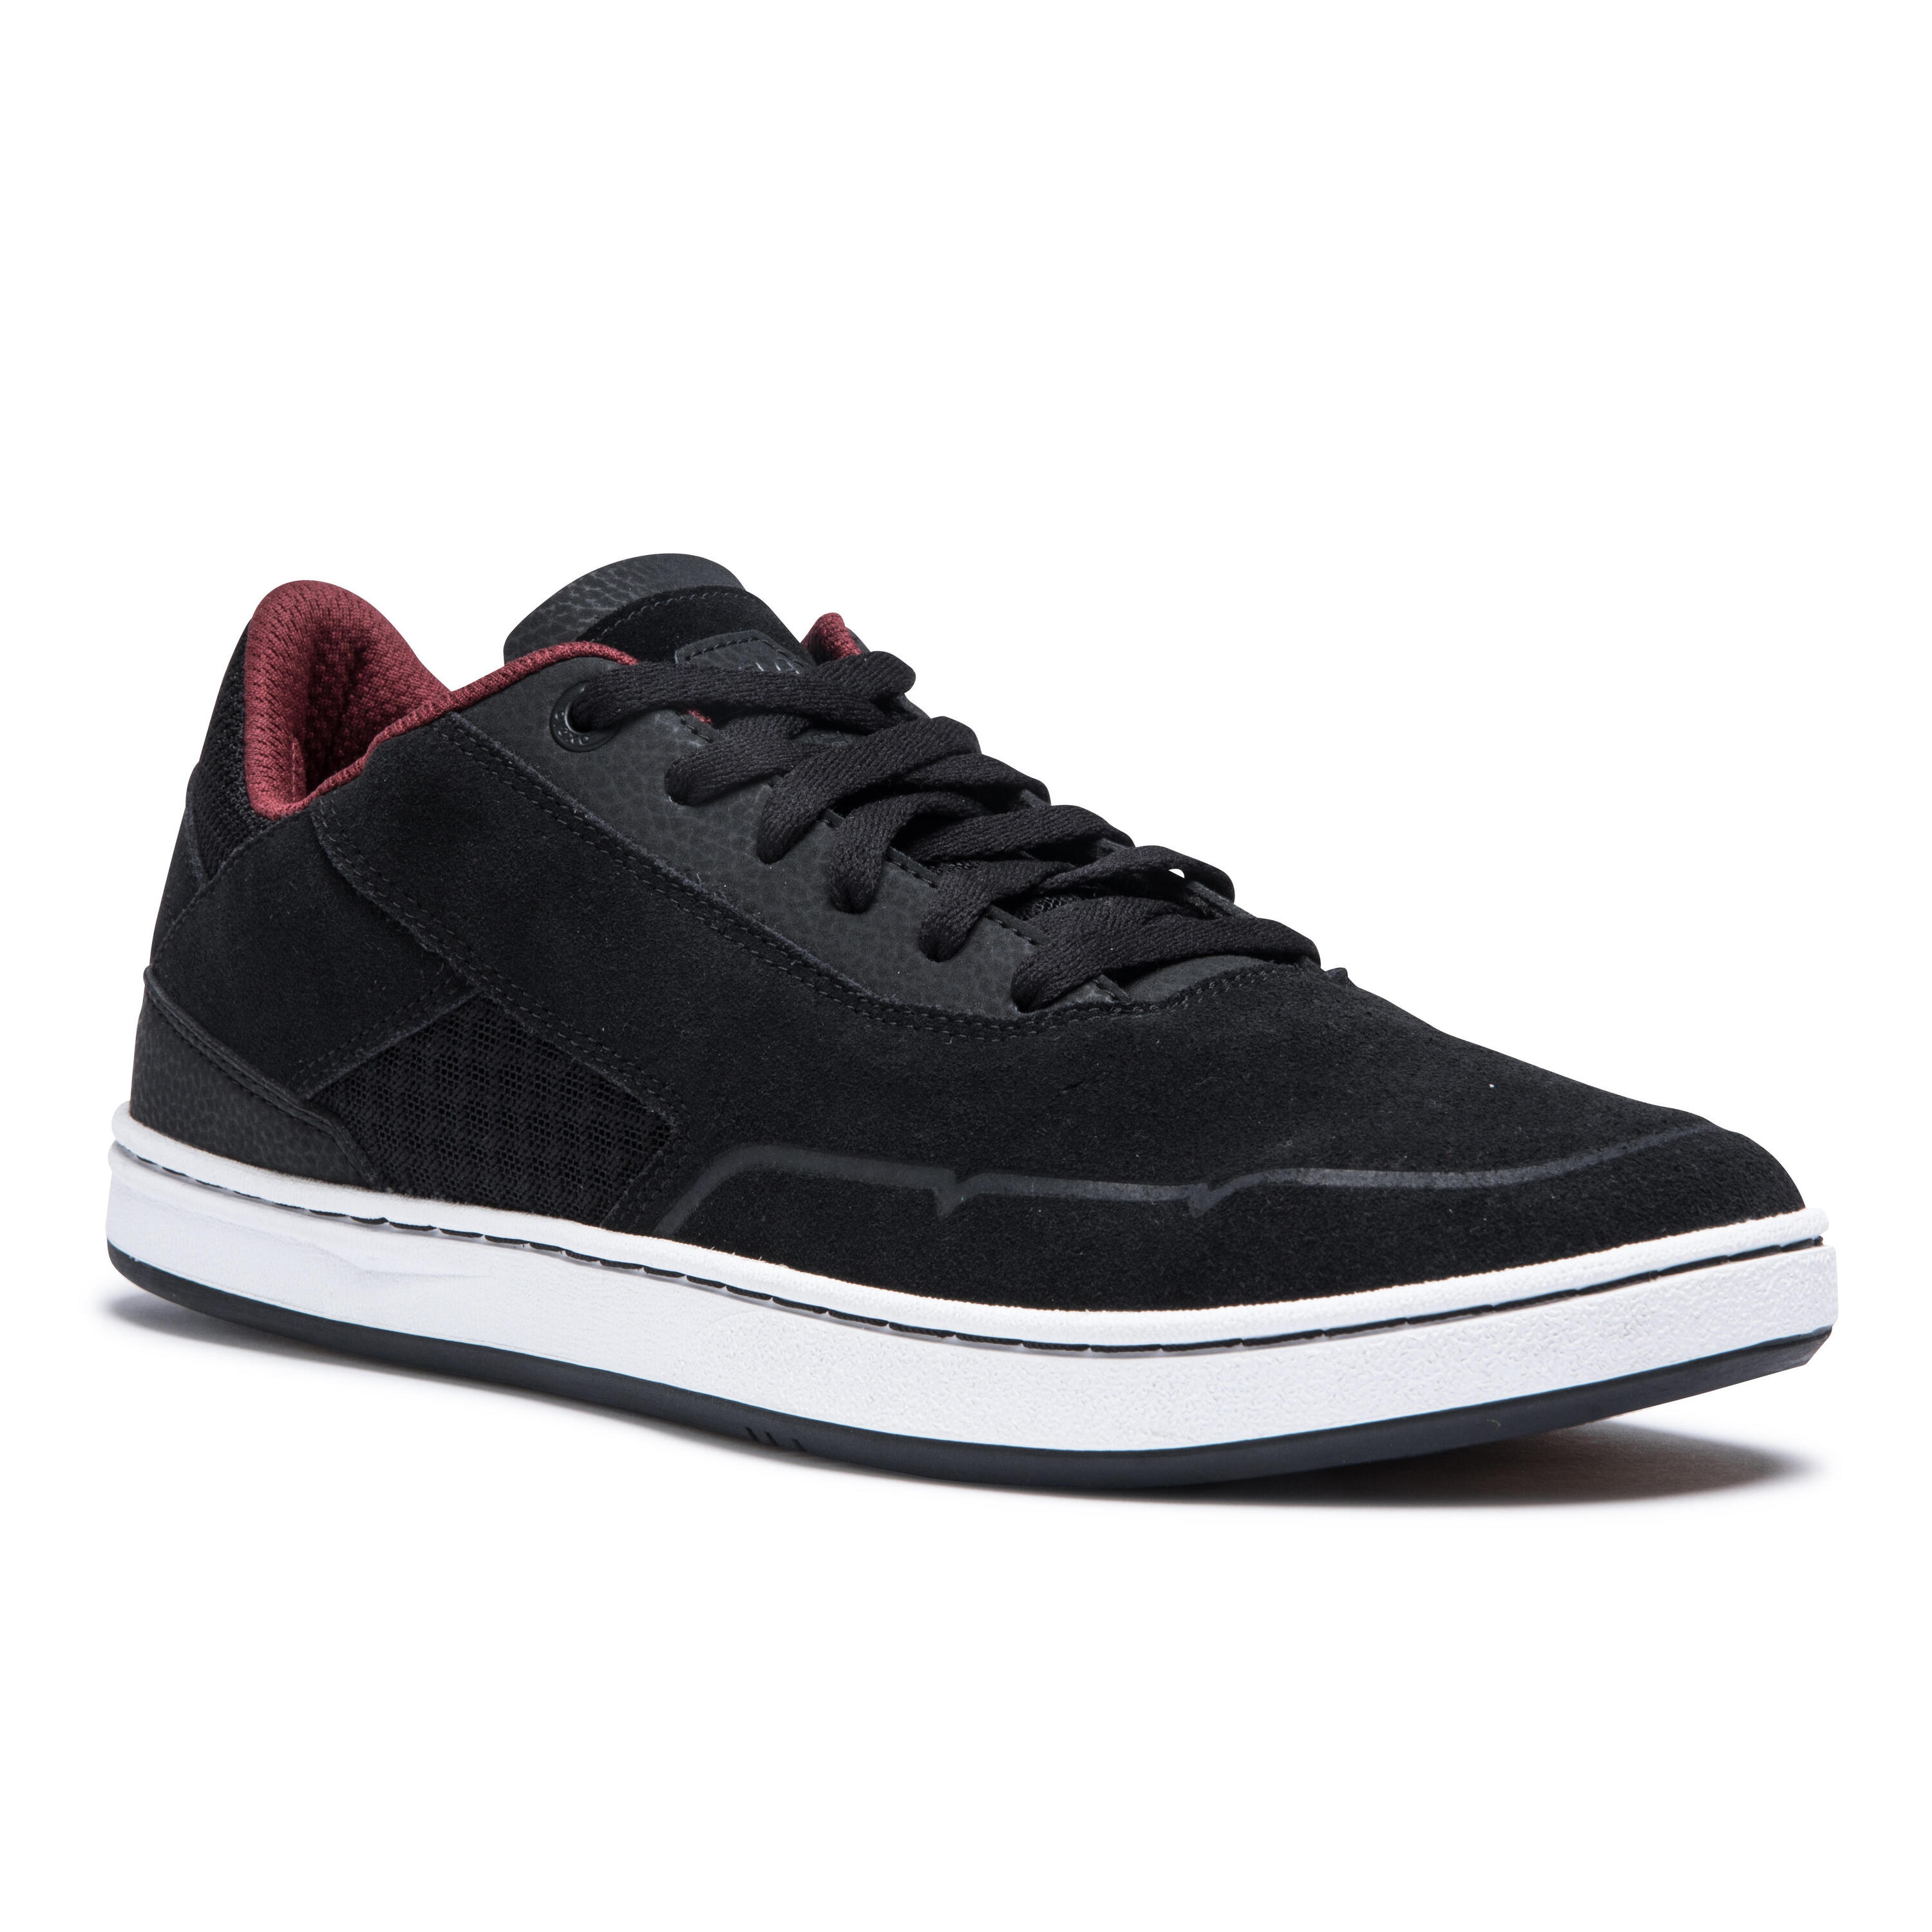 Crush 500 Adult Low-Top Cupsole Skate Shoes - Black/Burgundy 13/14